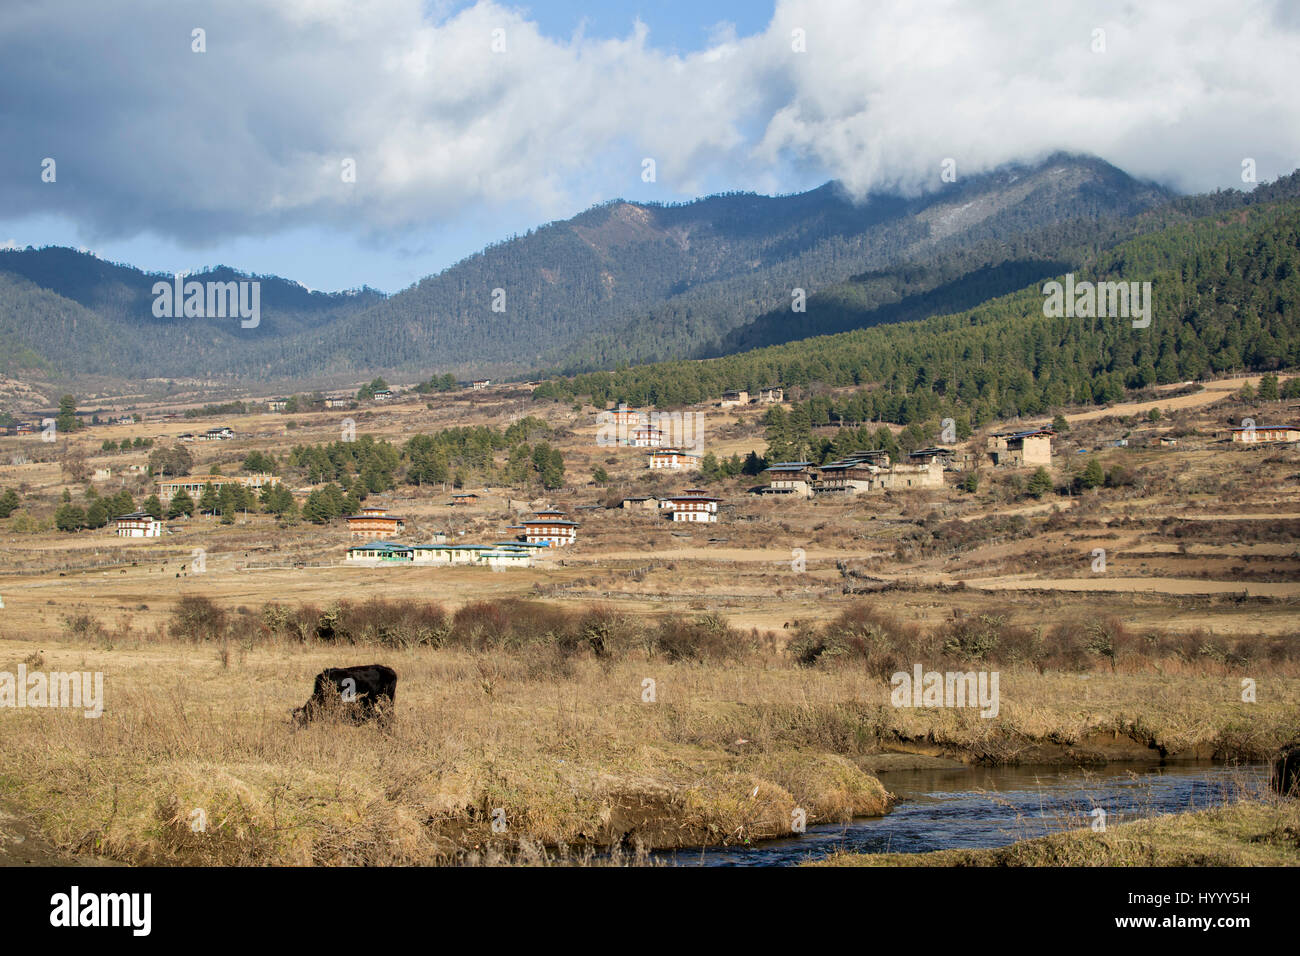 Phobjkha Valley is known for its potatoes and the black necked crane (Bhutan) Stock Photo